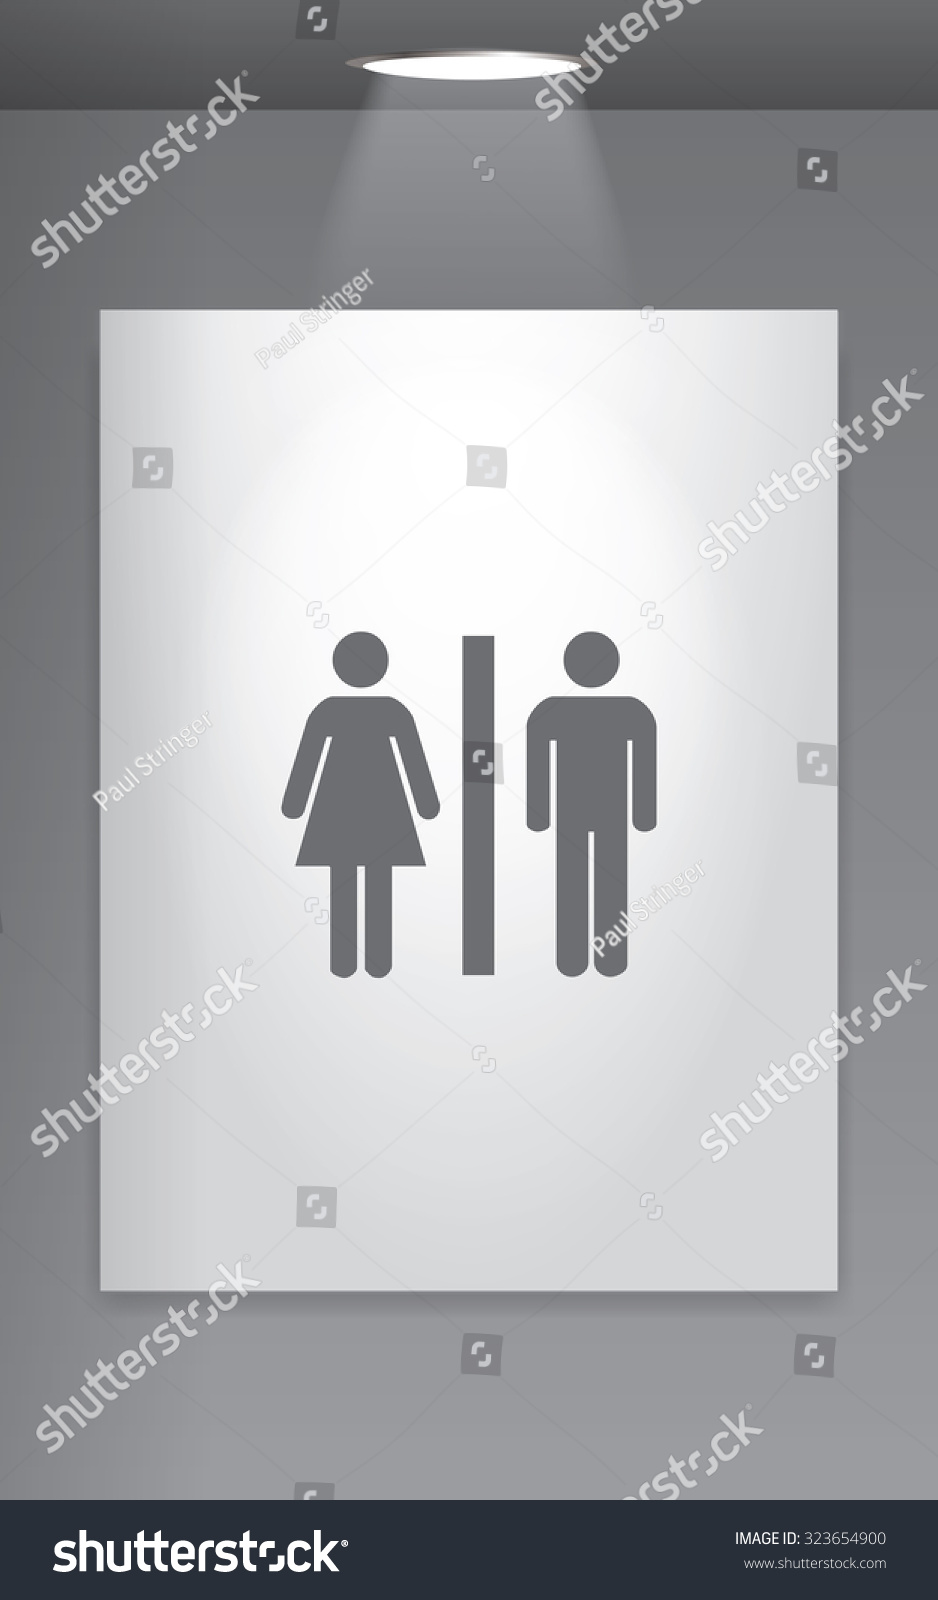 A Grey Icon Isolated on Gallery Wall - Toilet #323654900